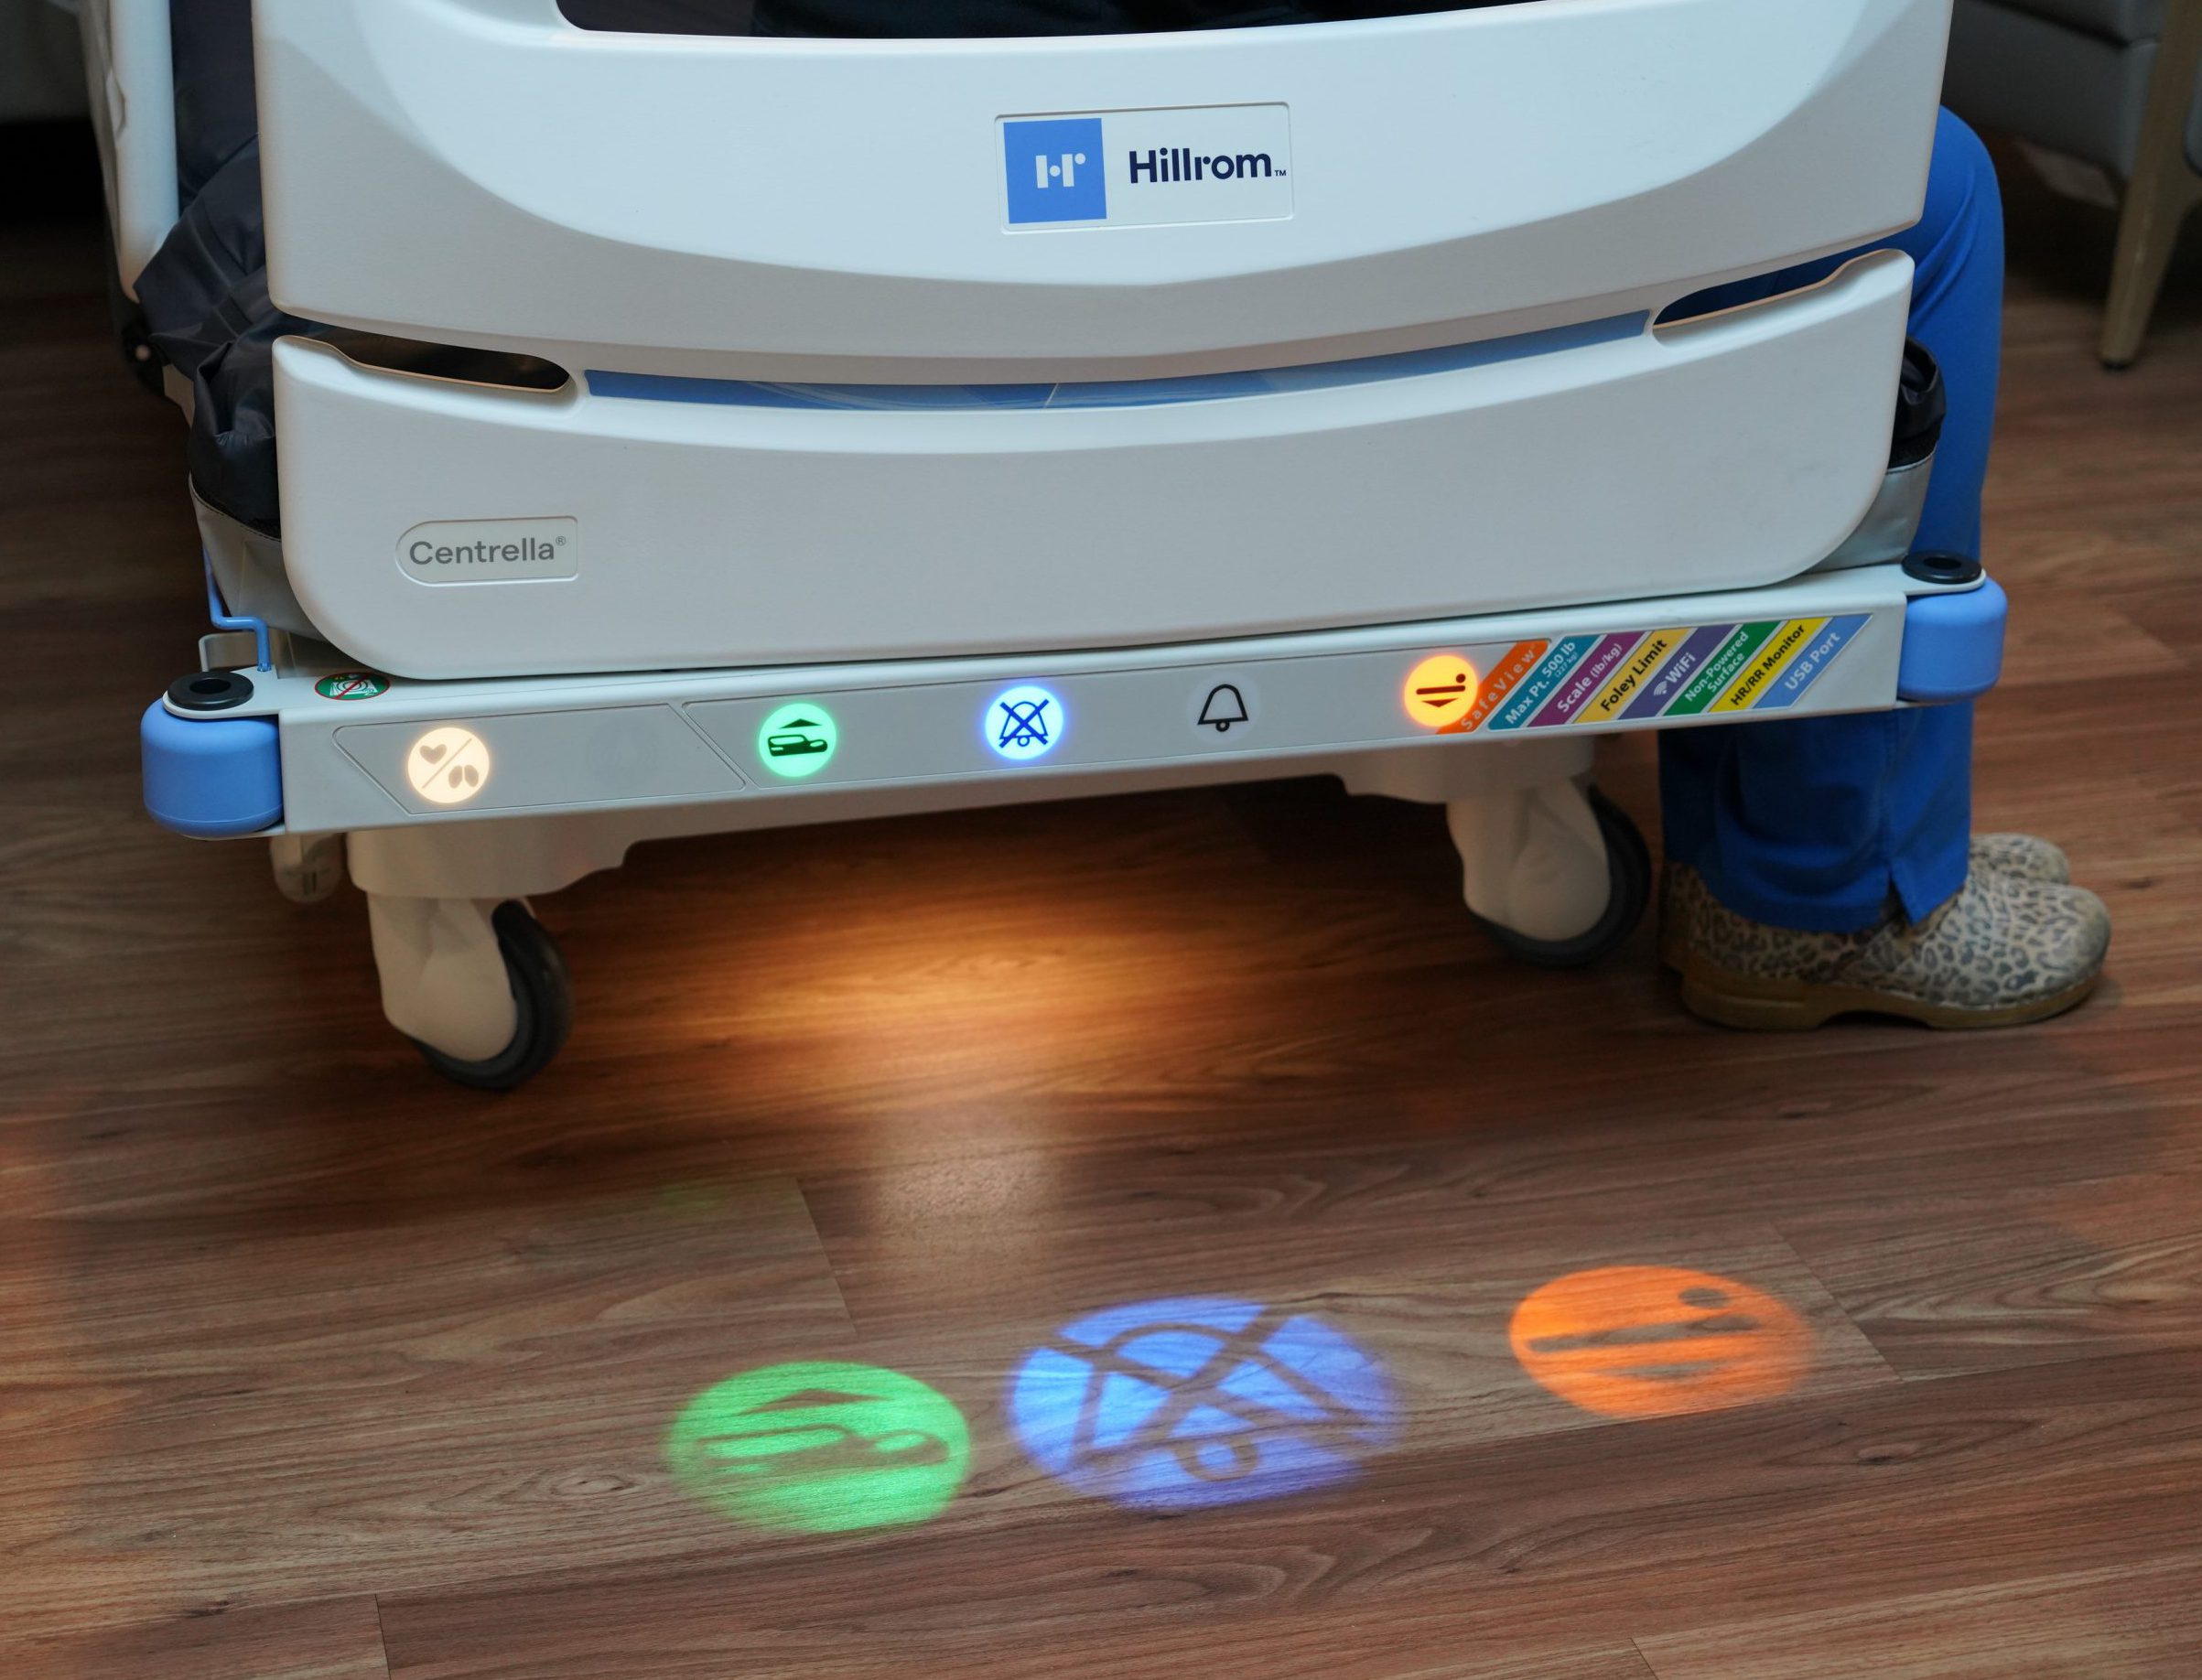 Hospital bed with display light settings that project on the floor